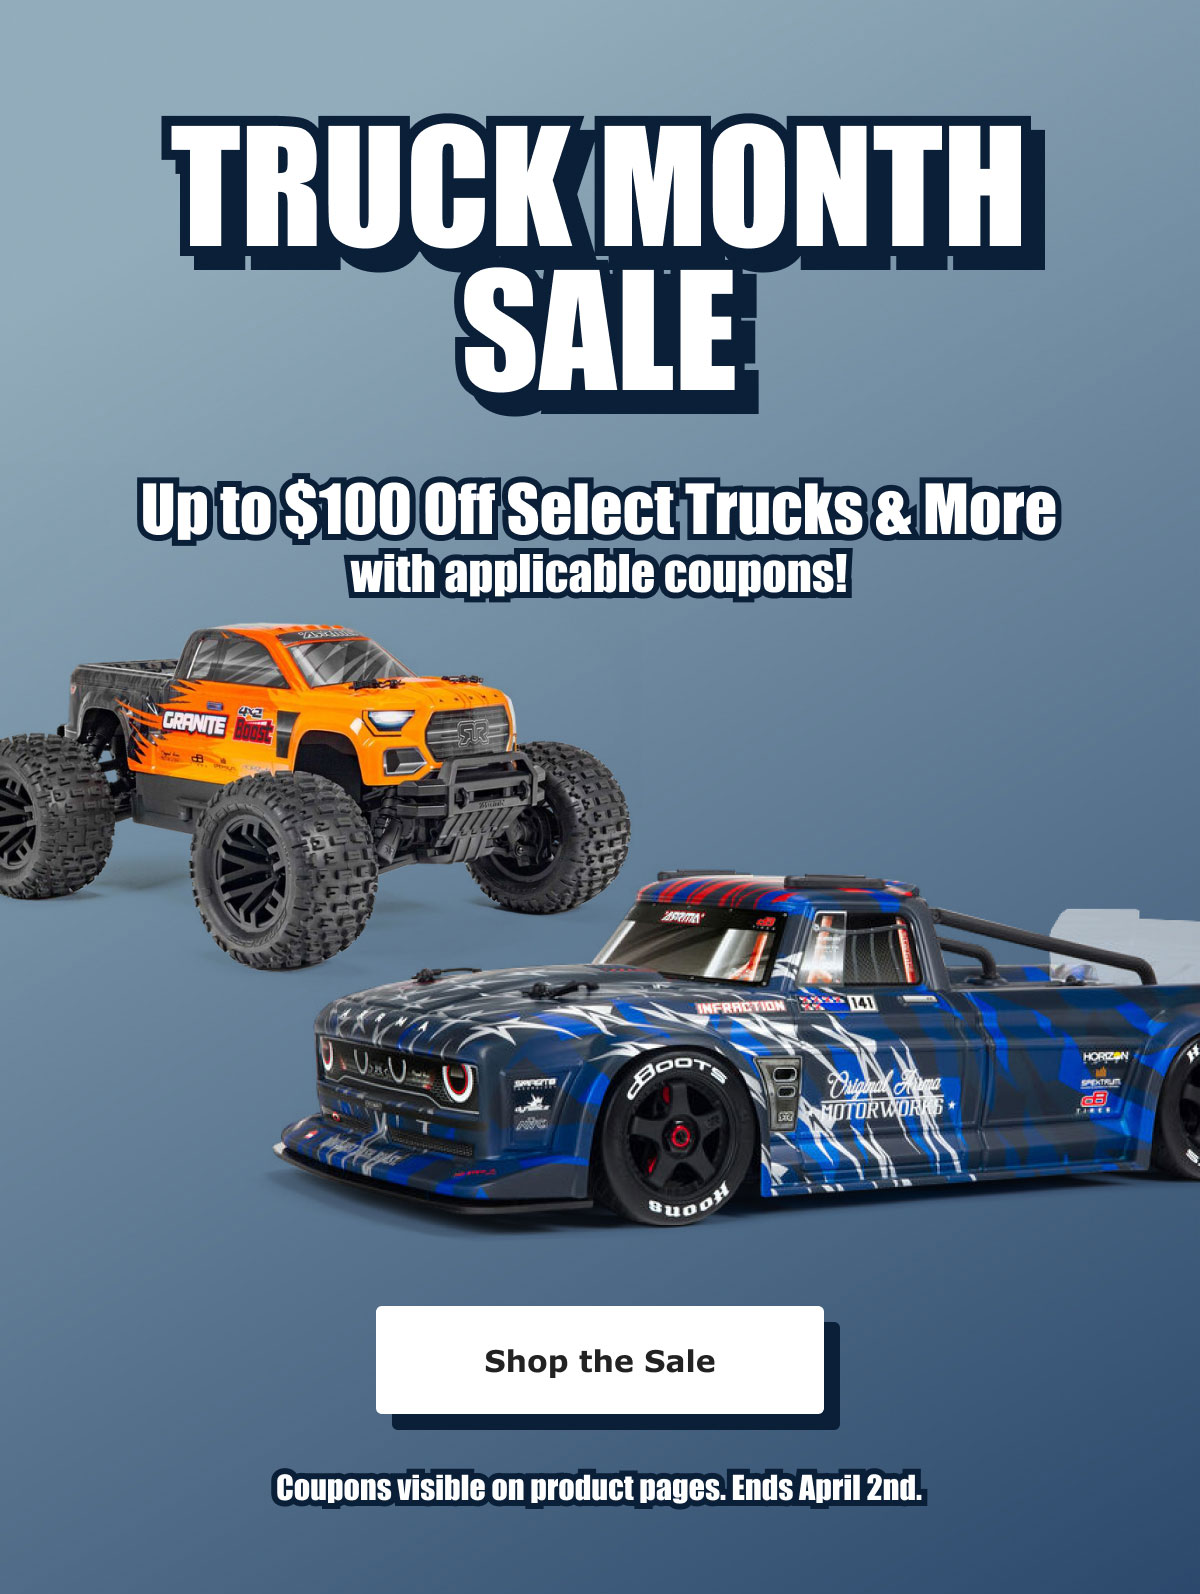 Truck Month Sale - Up to $100 Off Select Trucks & More with applicable coupons! Coupons visible on product pages. Ends April 2nd. Shop the Sale W S N Unto$1000ff Select:Trucks'a More with applicable coupons! Shop the Sale TS T GO D TR TR T T A TR 